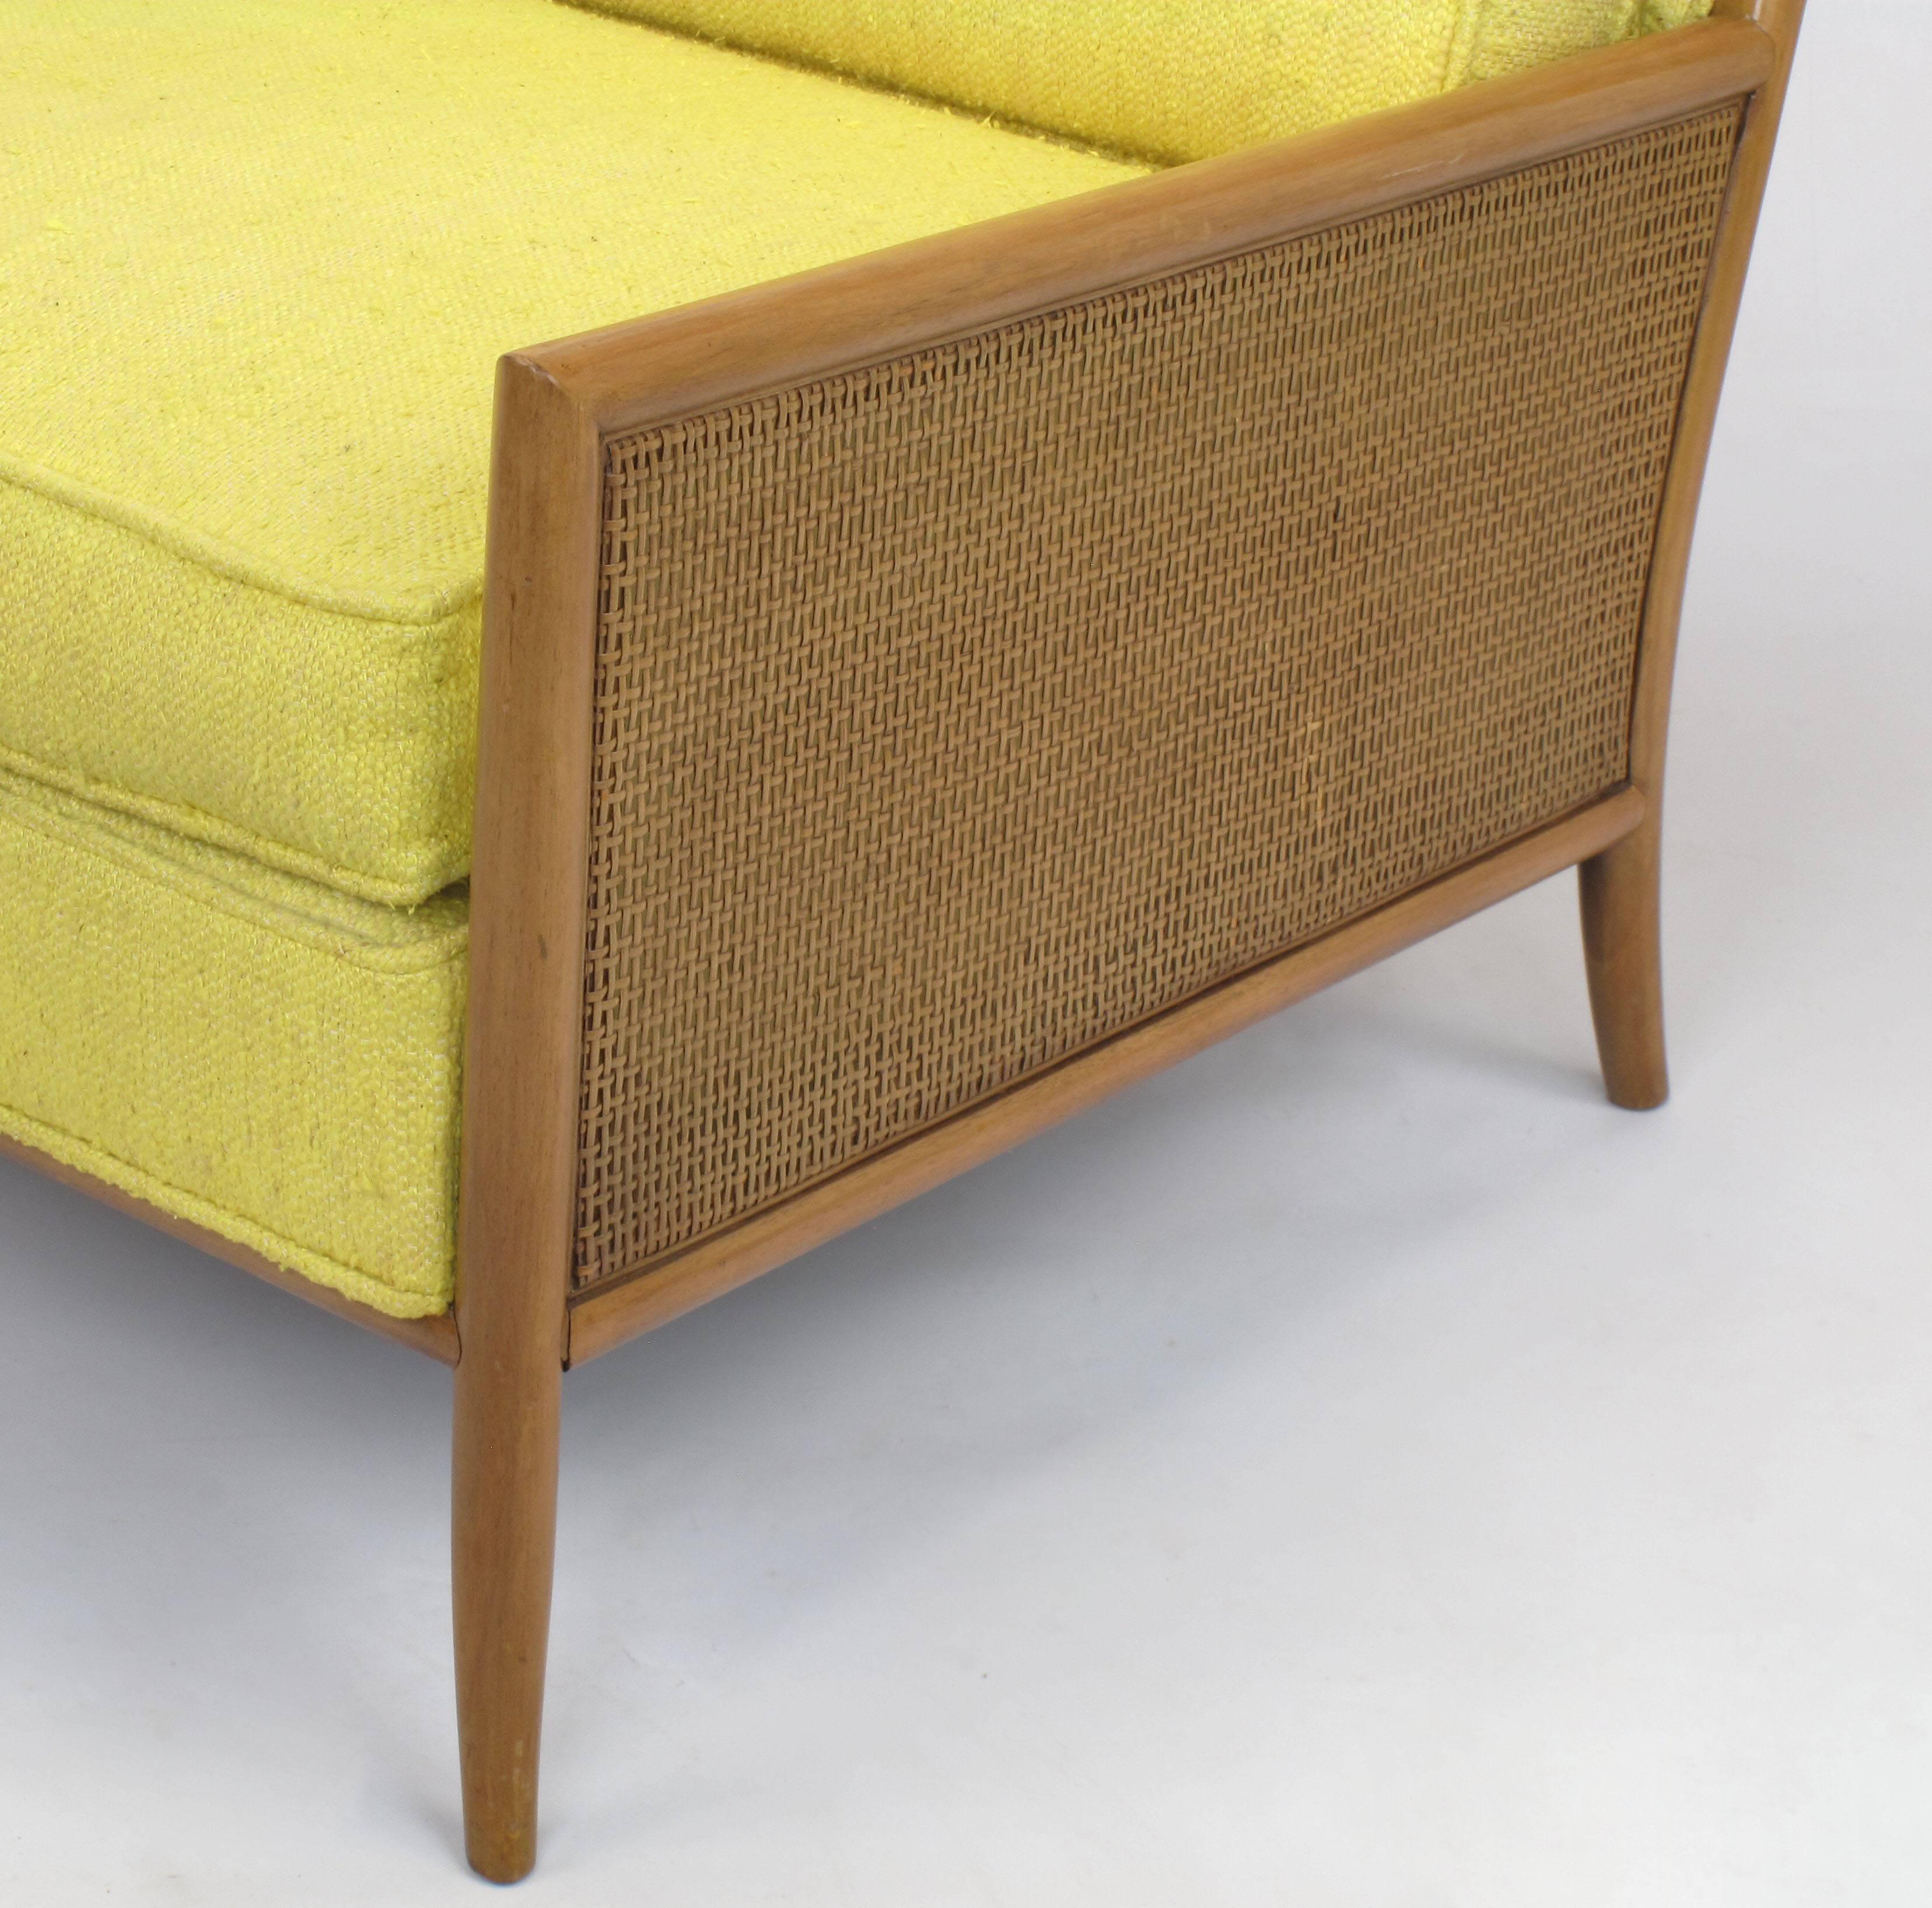 Mid-20th Century Pair of Walnut & Yellow Haitian Cotton Lounge Chairs after TH. Robsjohn-Gibbings